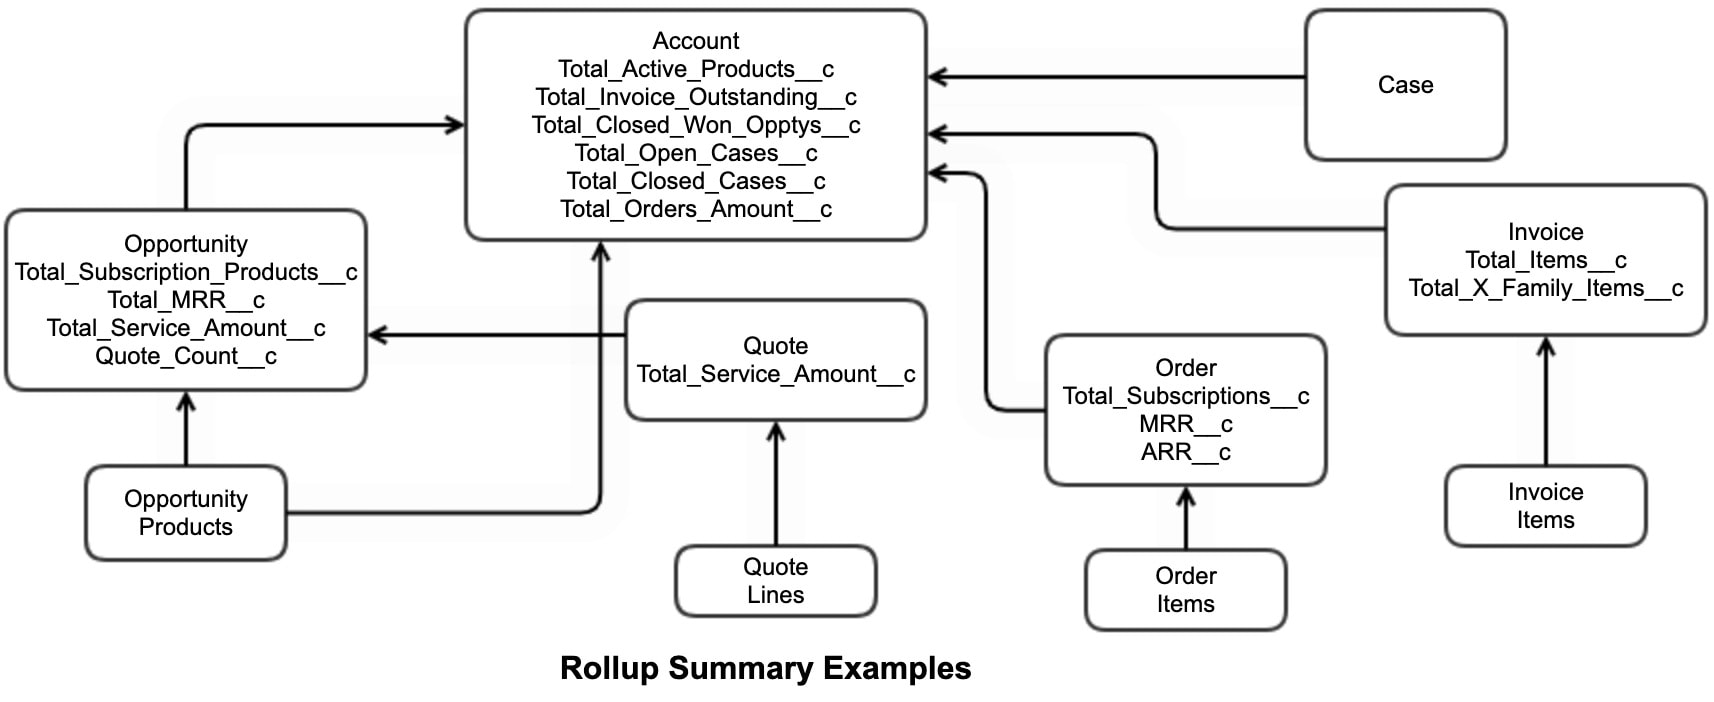 Rollup summary examples